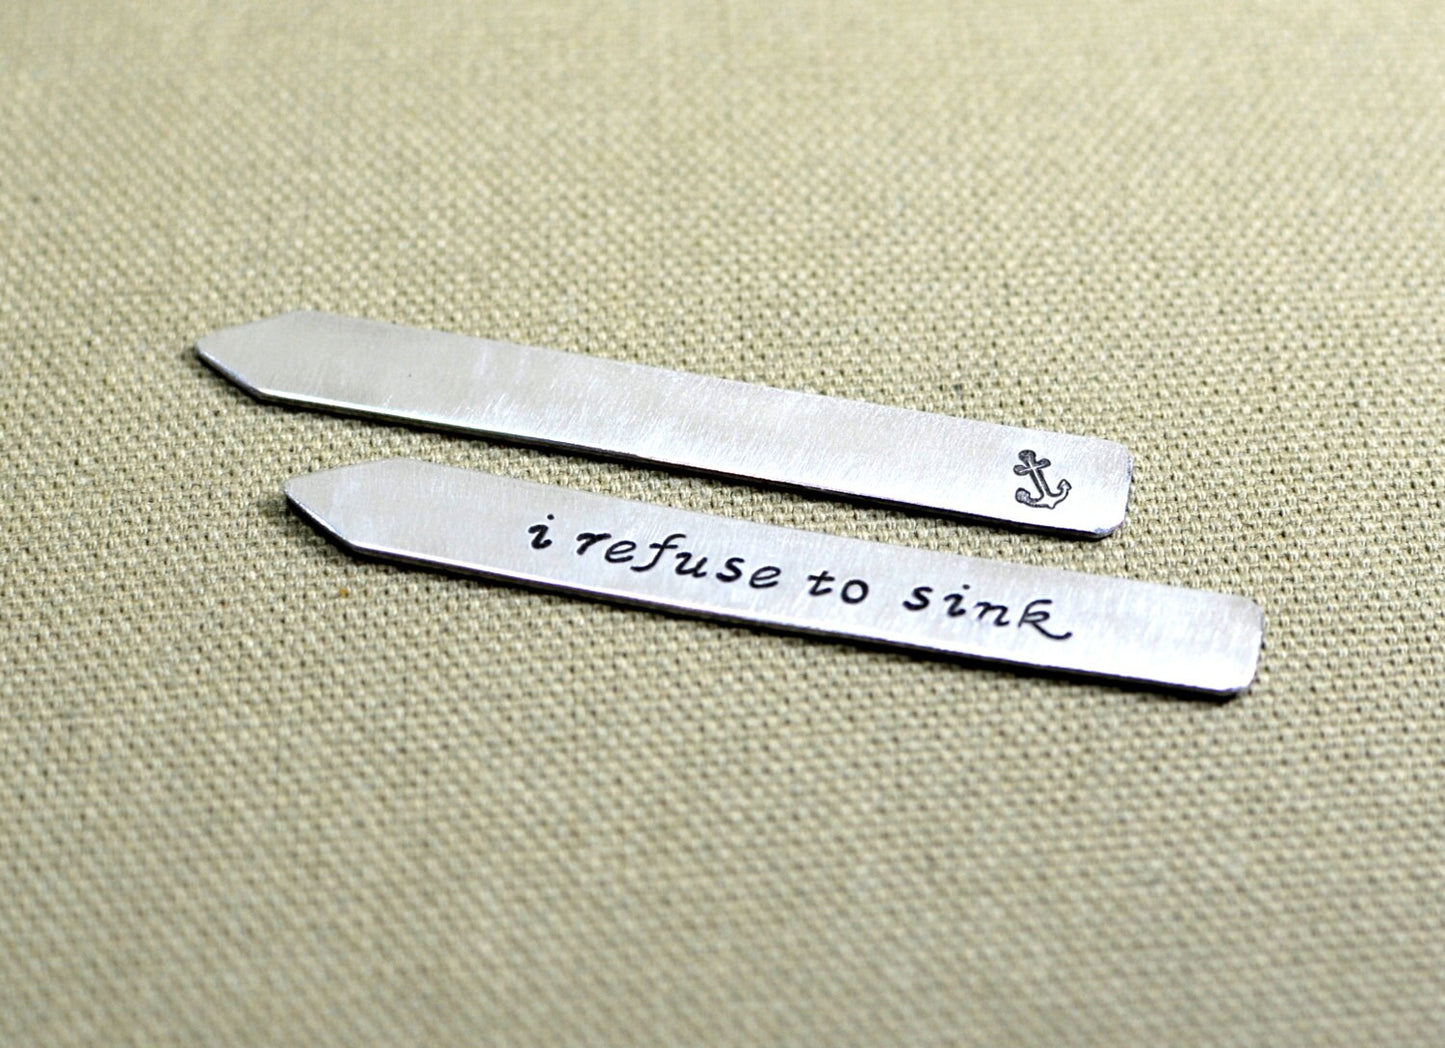 Sterling silver collar stays stamped with refuse to sink